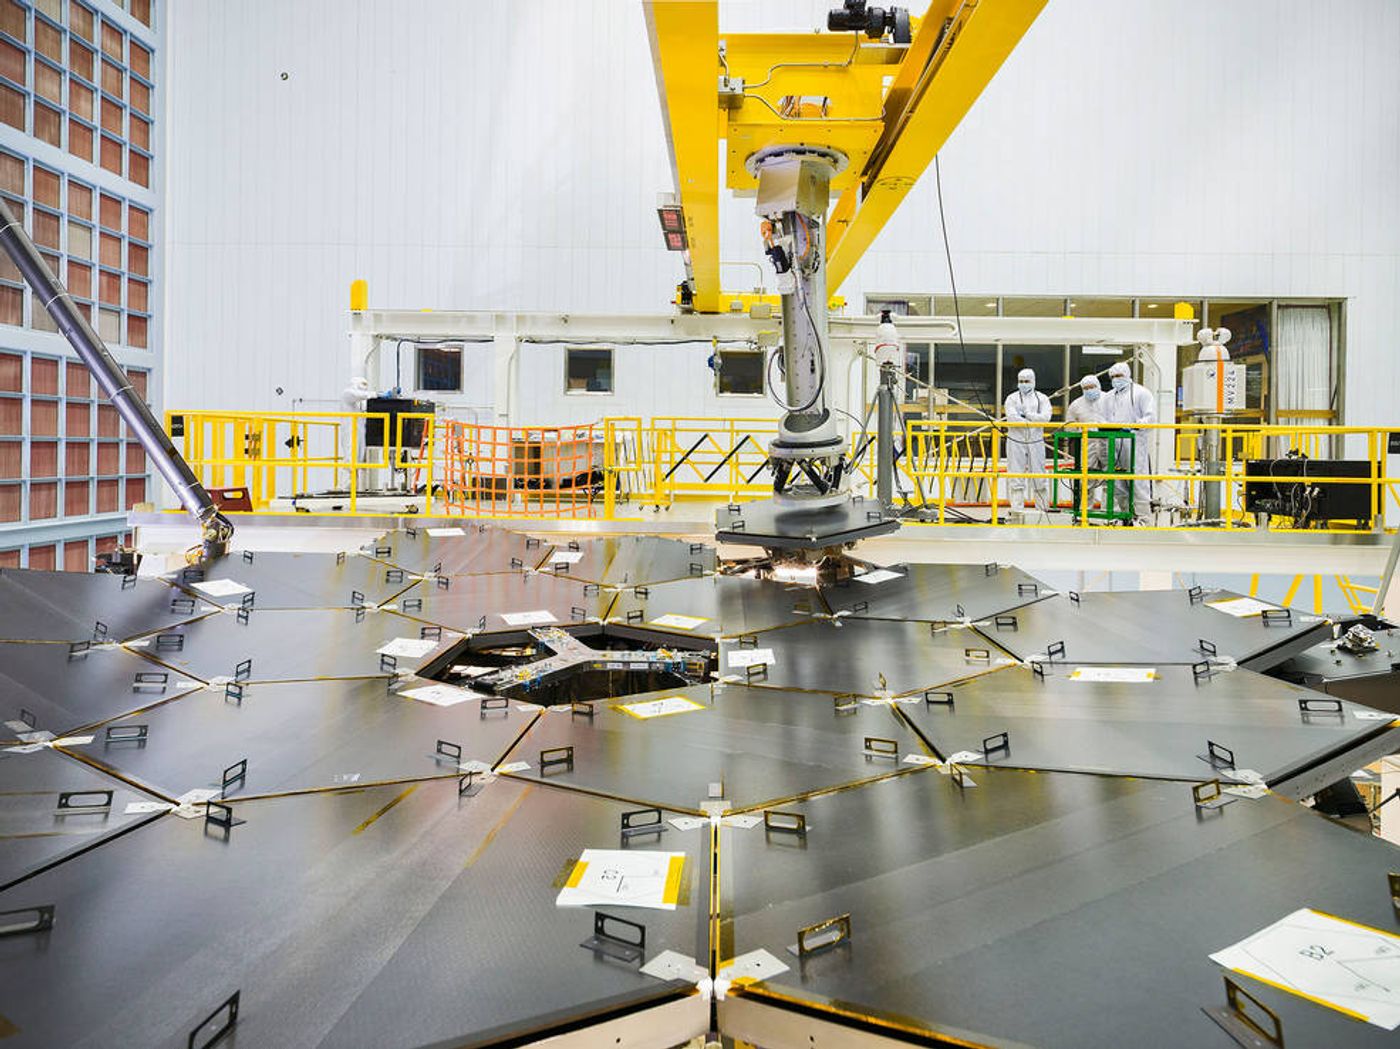 The James Webb Space Telescope's primary mirror assembly has been completed.